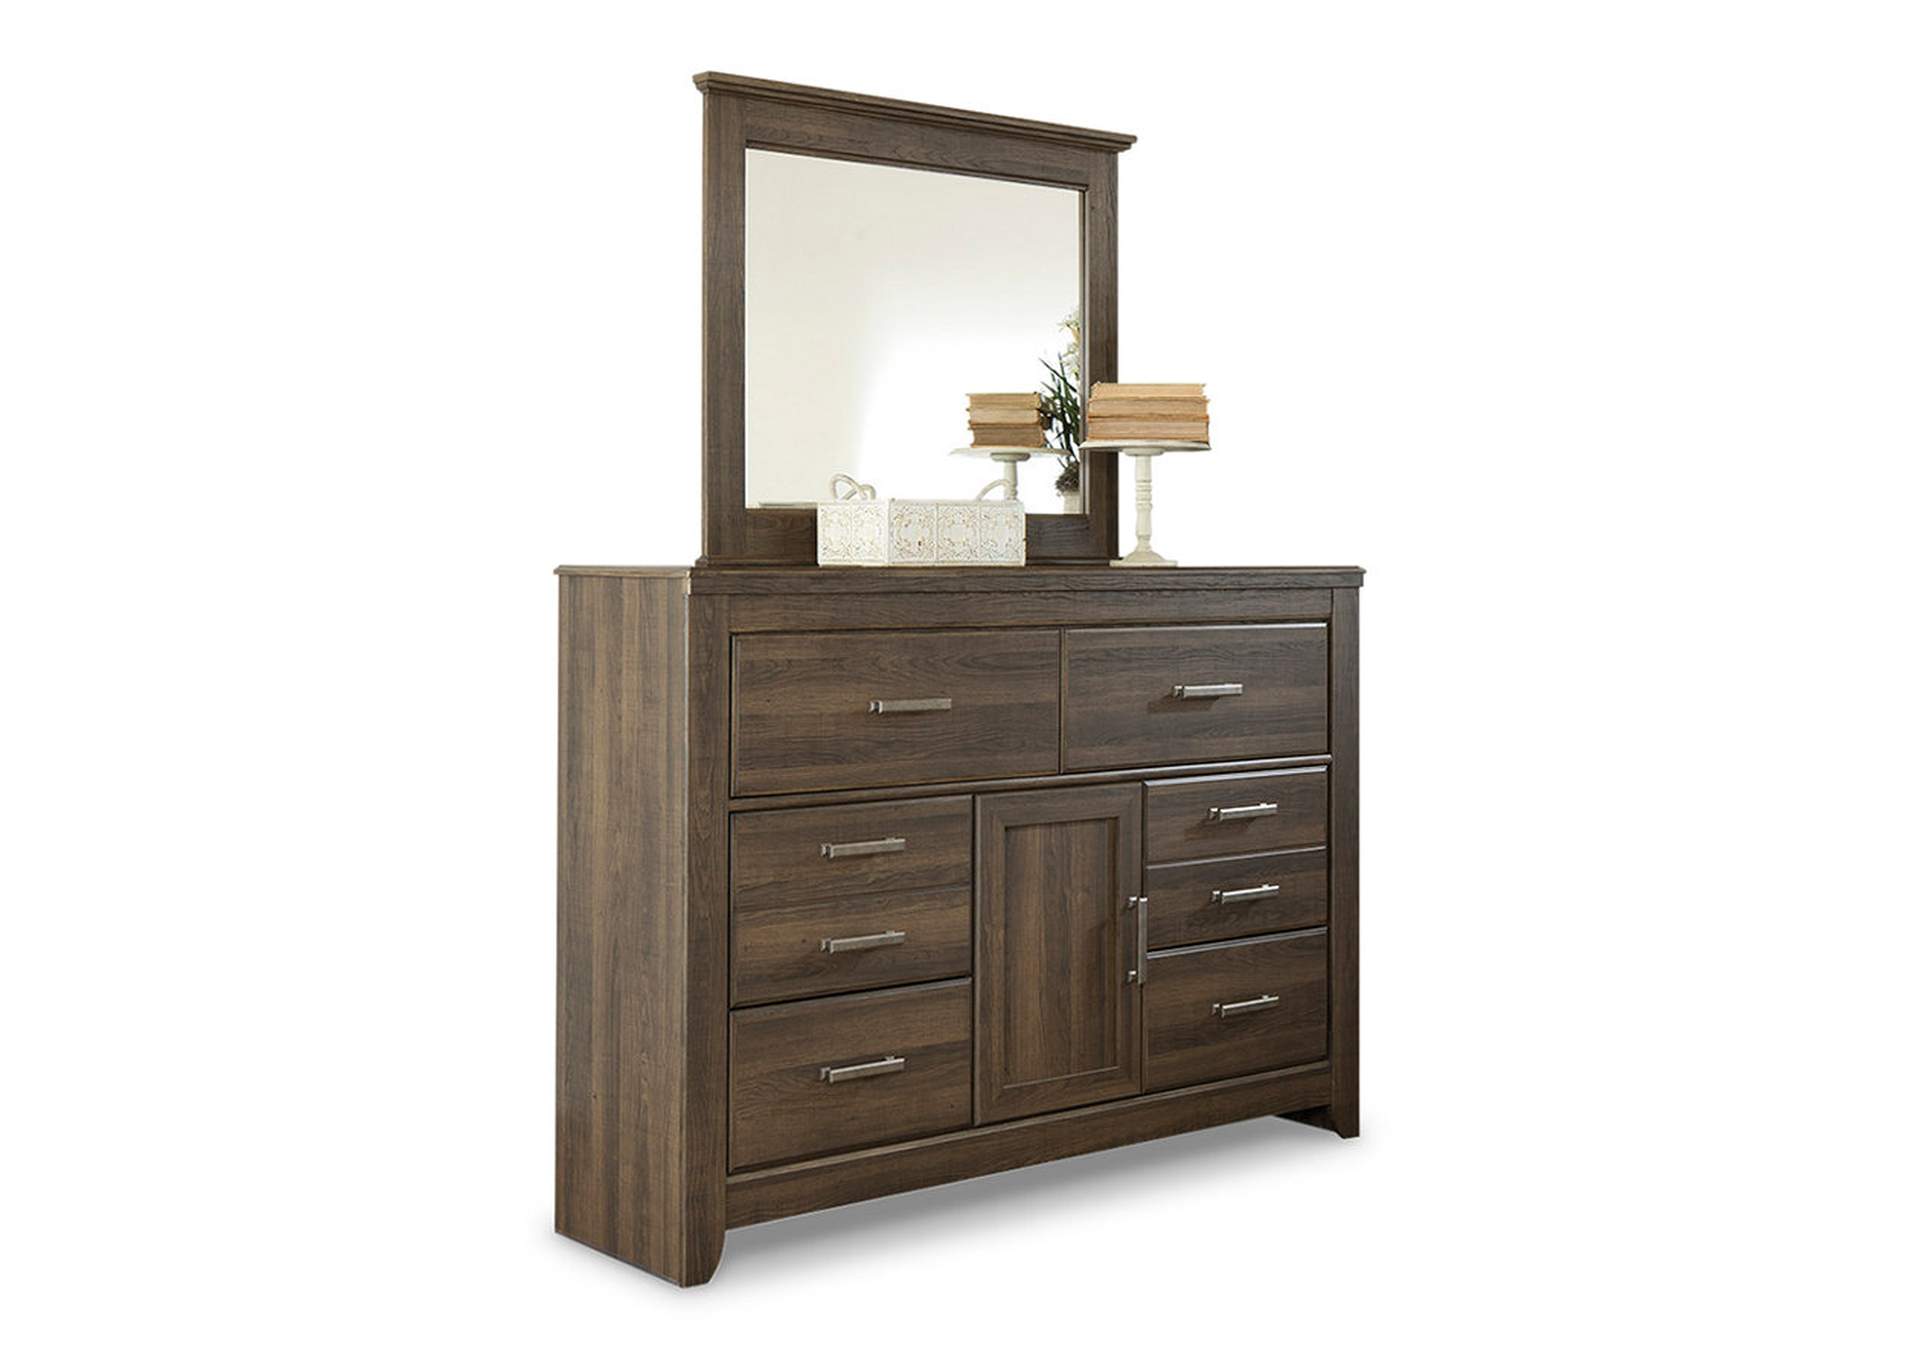 Juararo King Poster Bed with Mirrored Dresser and Nightstand,Signature Design By Ashley